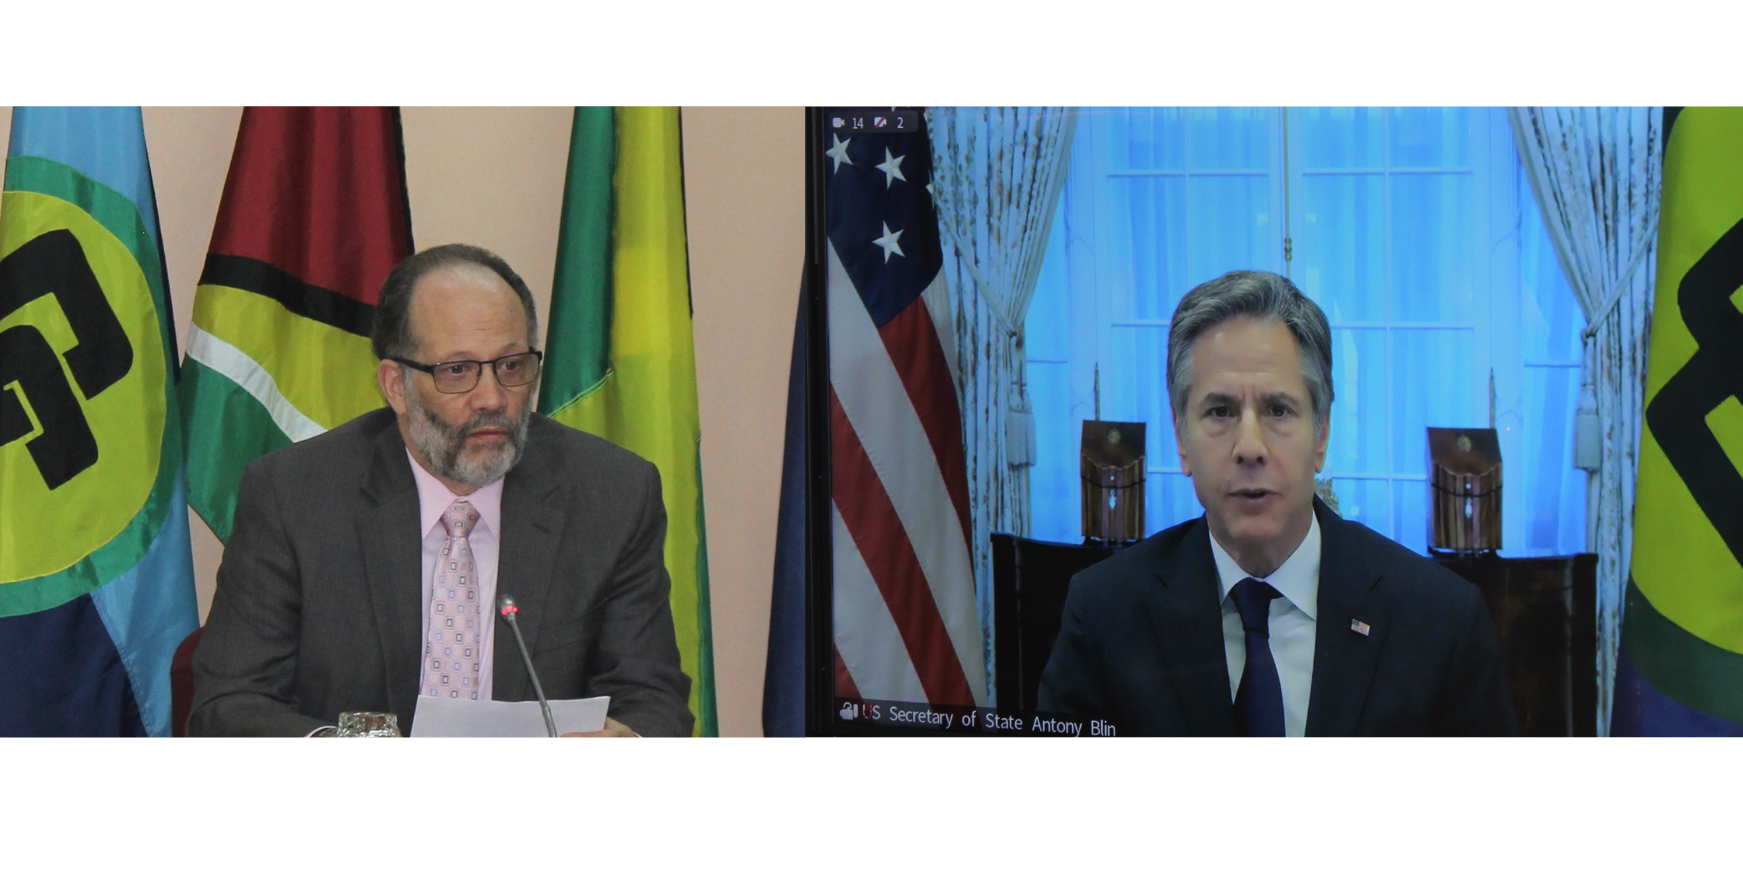 us-sect-of-state-caricom-meeting